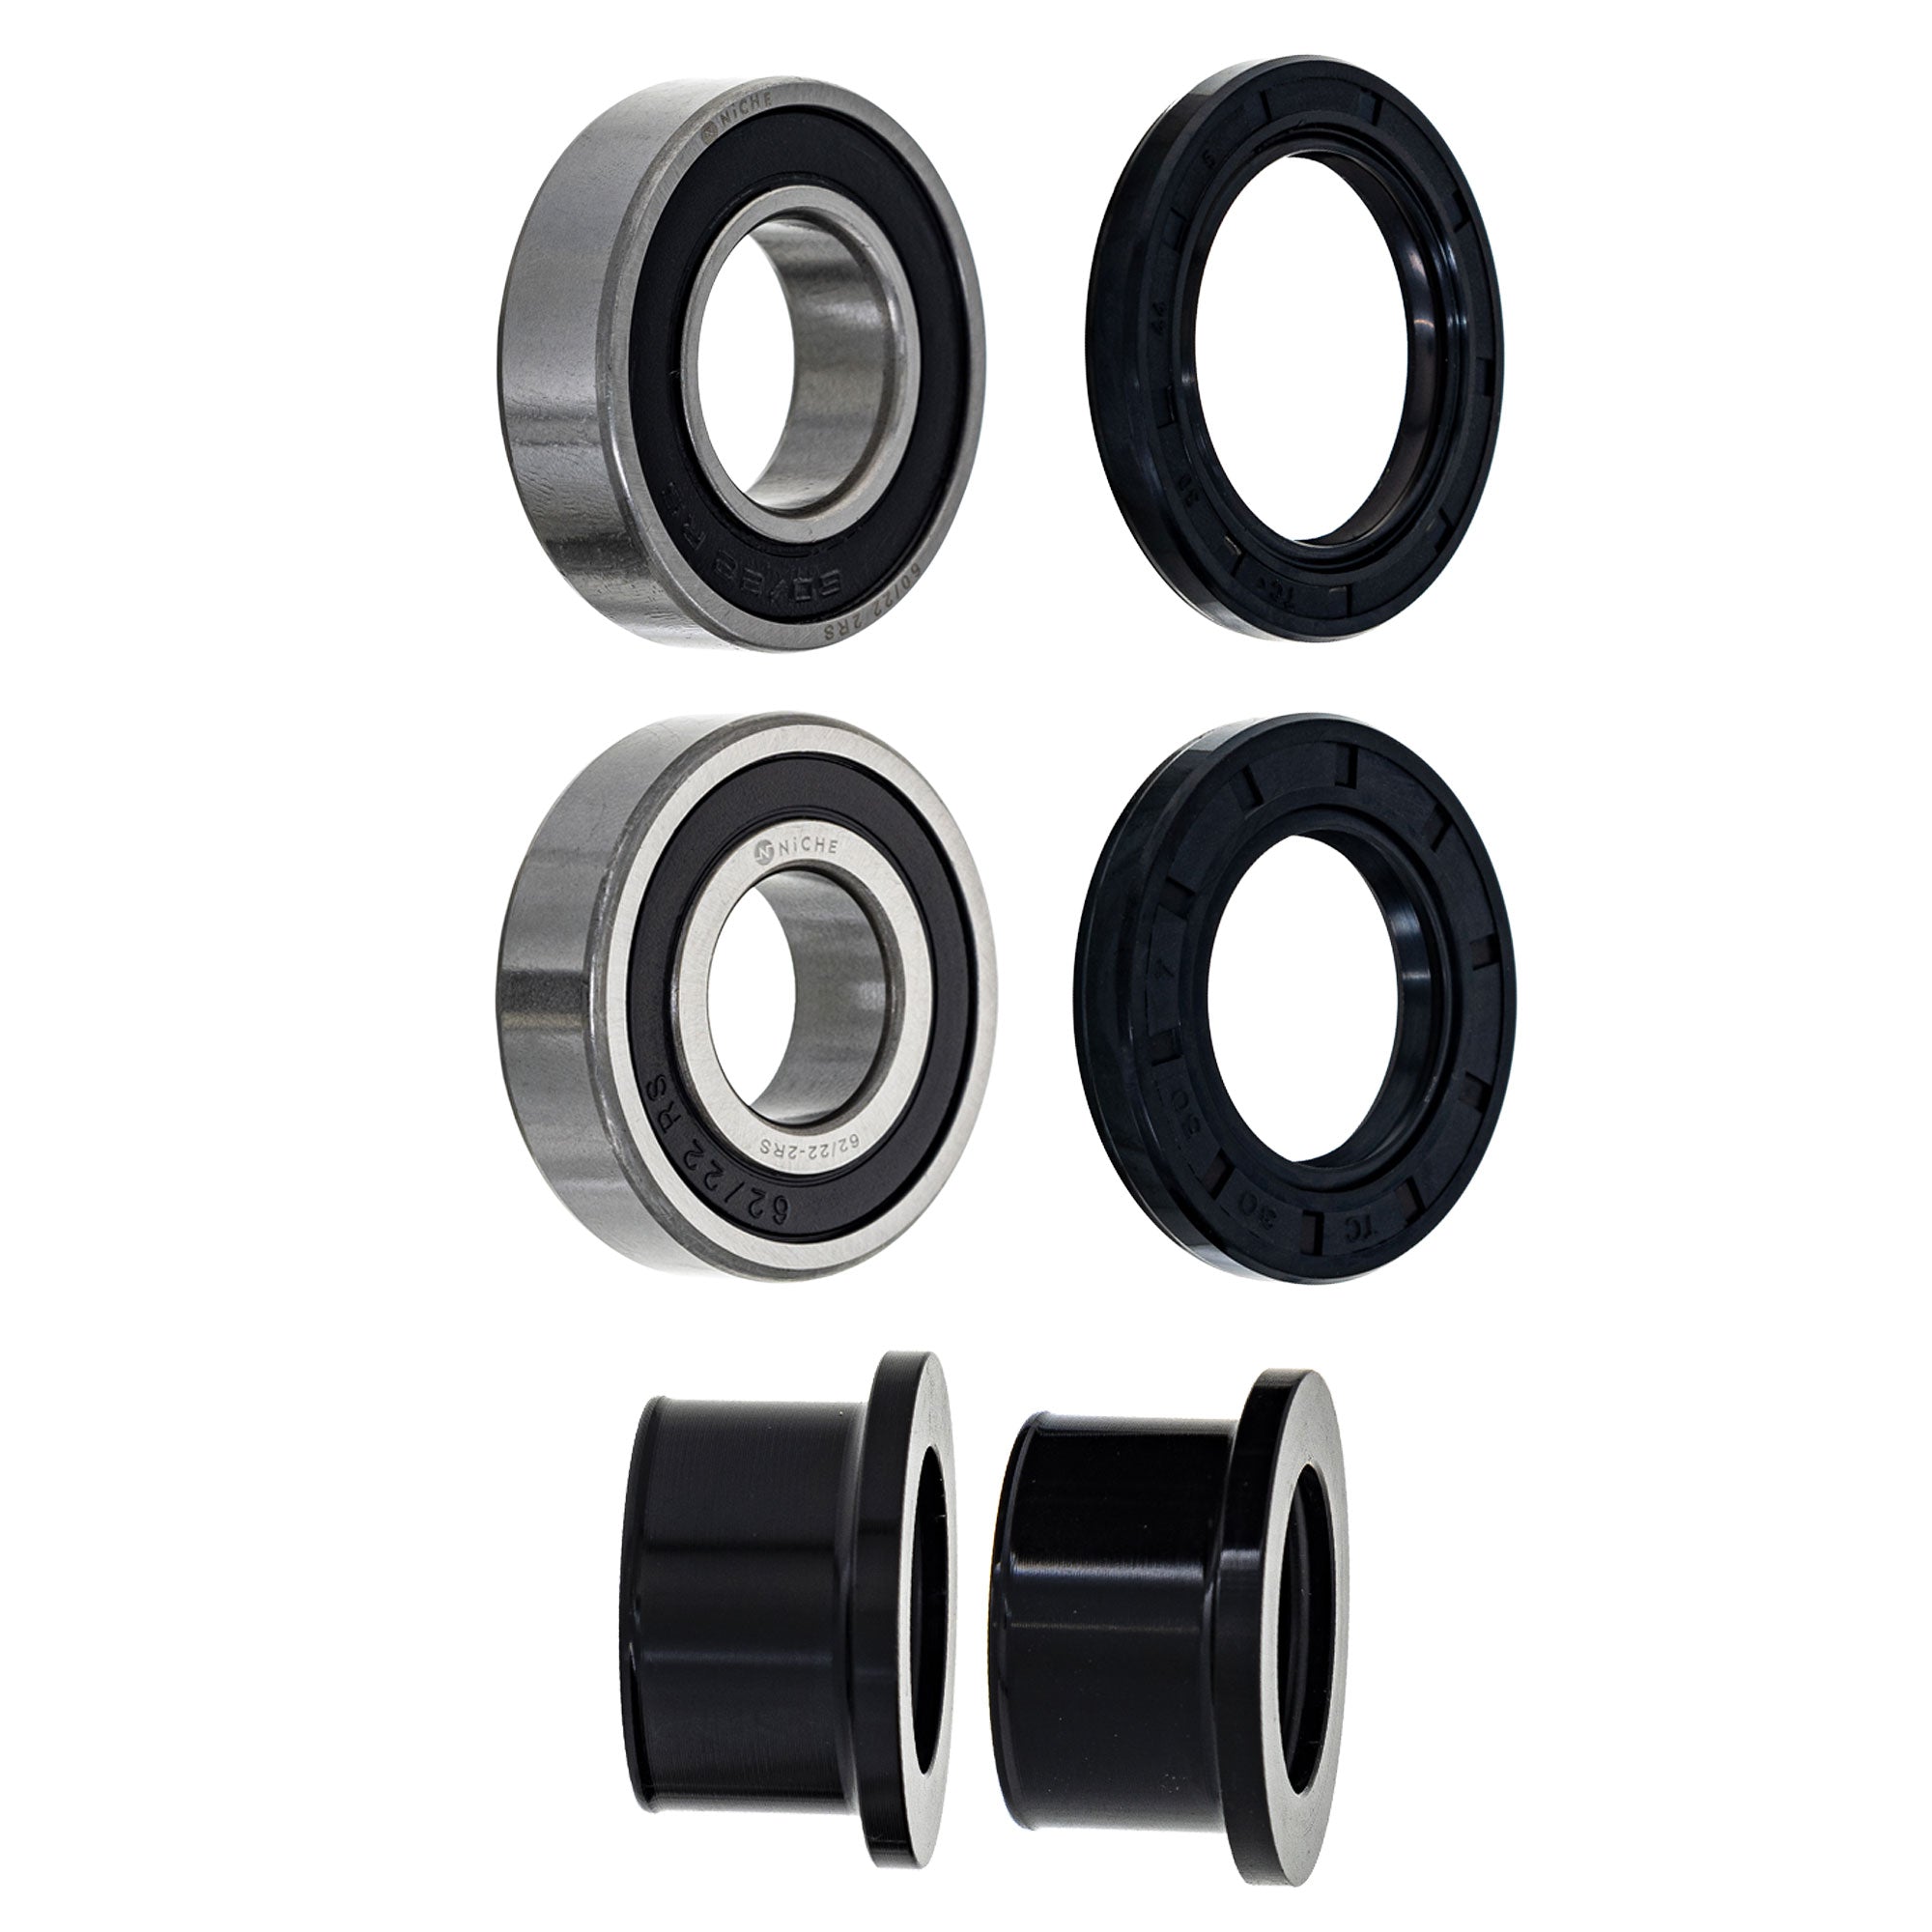 Wheel Bearing Spacer Seal Kit for zOTHER YZ450FX YZ250X YZ250FX YZ250 NICHE MK1009240